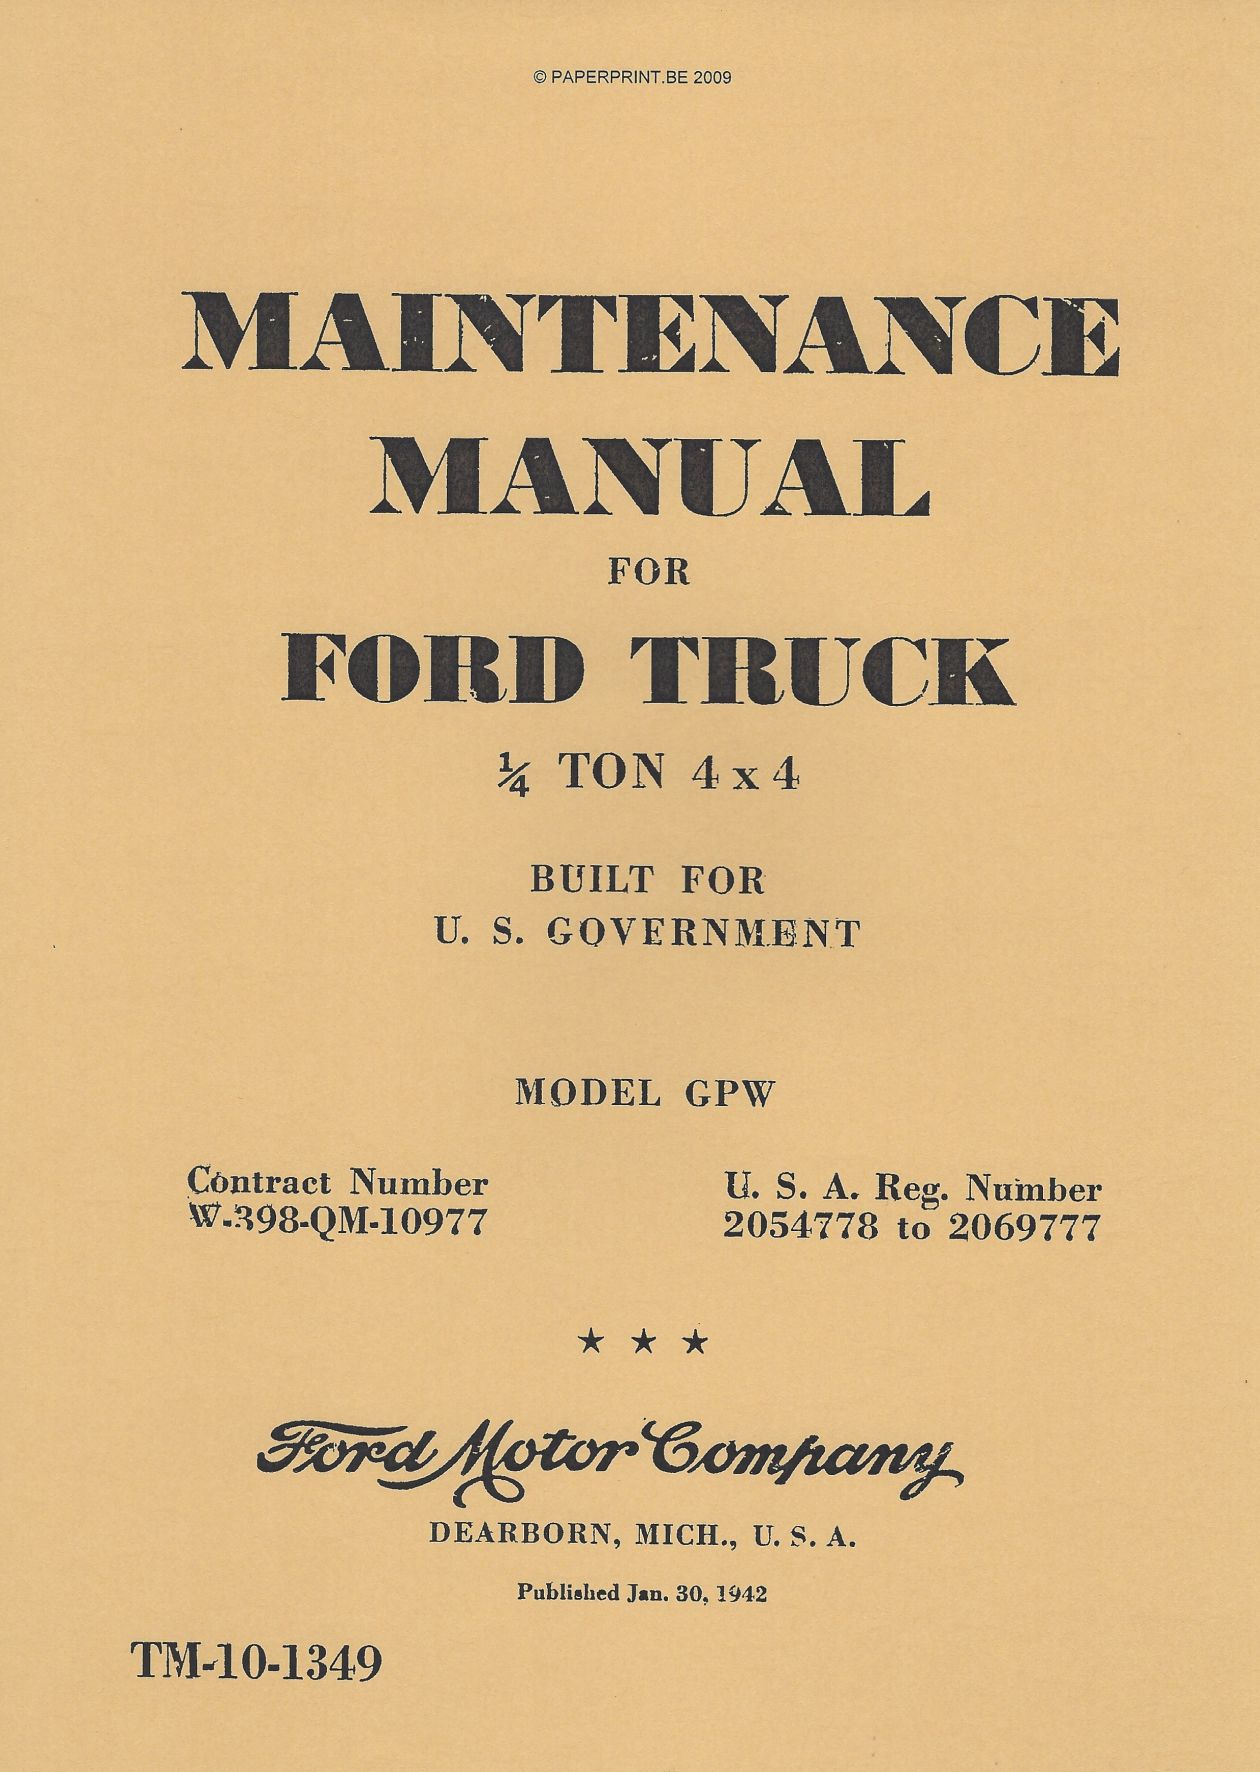 TM 10-1349 US MAINTENANCE MANUAL FOR FORD TRUCK ¼ TON 4x4